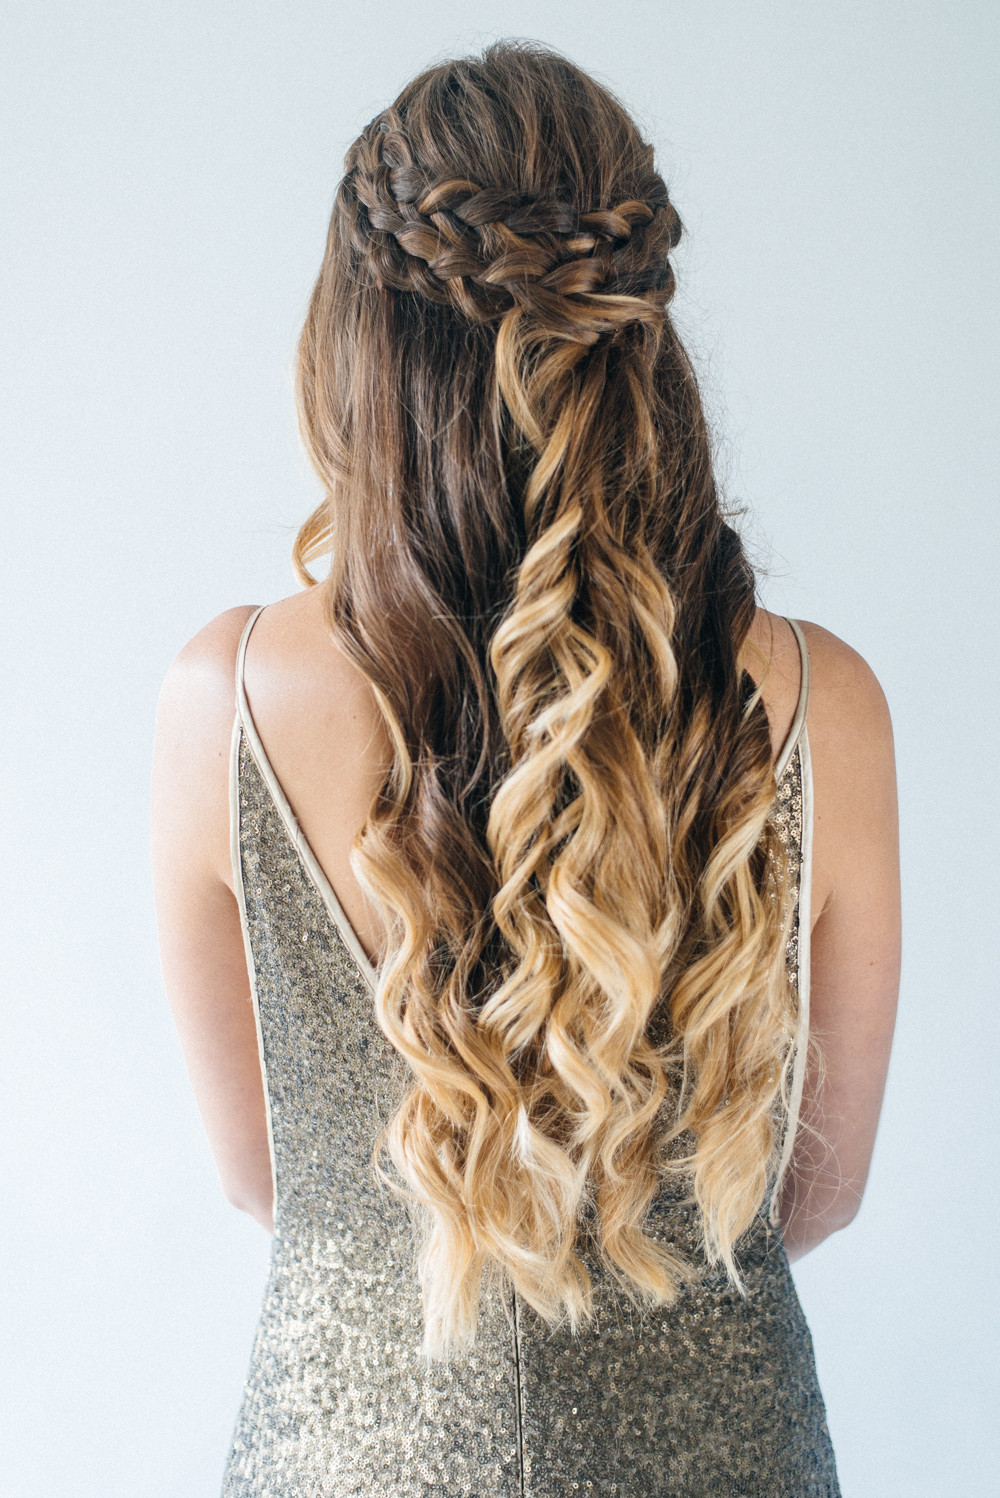 Half Up Half Down Wedding Hairstyles With Braids
 Inspiration For Half Up Half Down Wedding Hair With